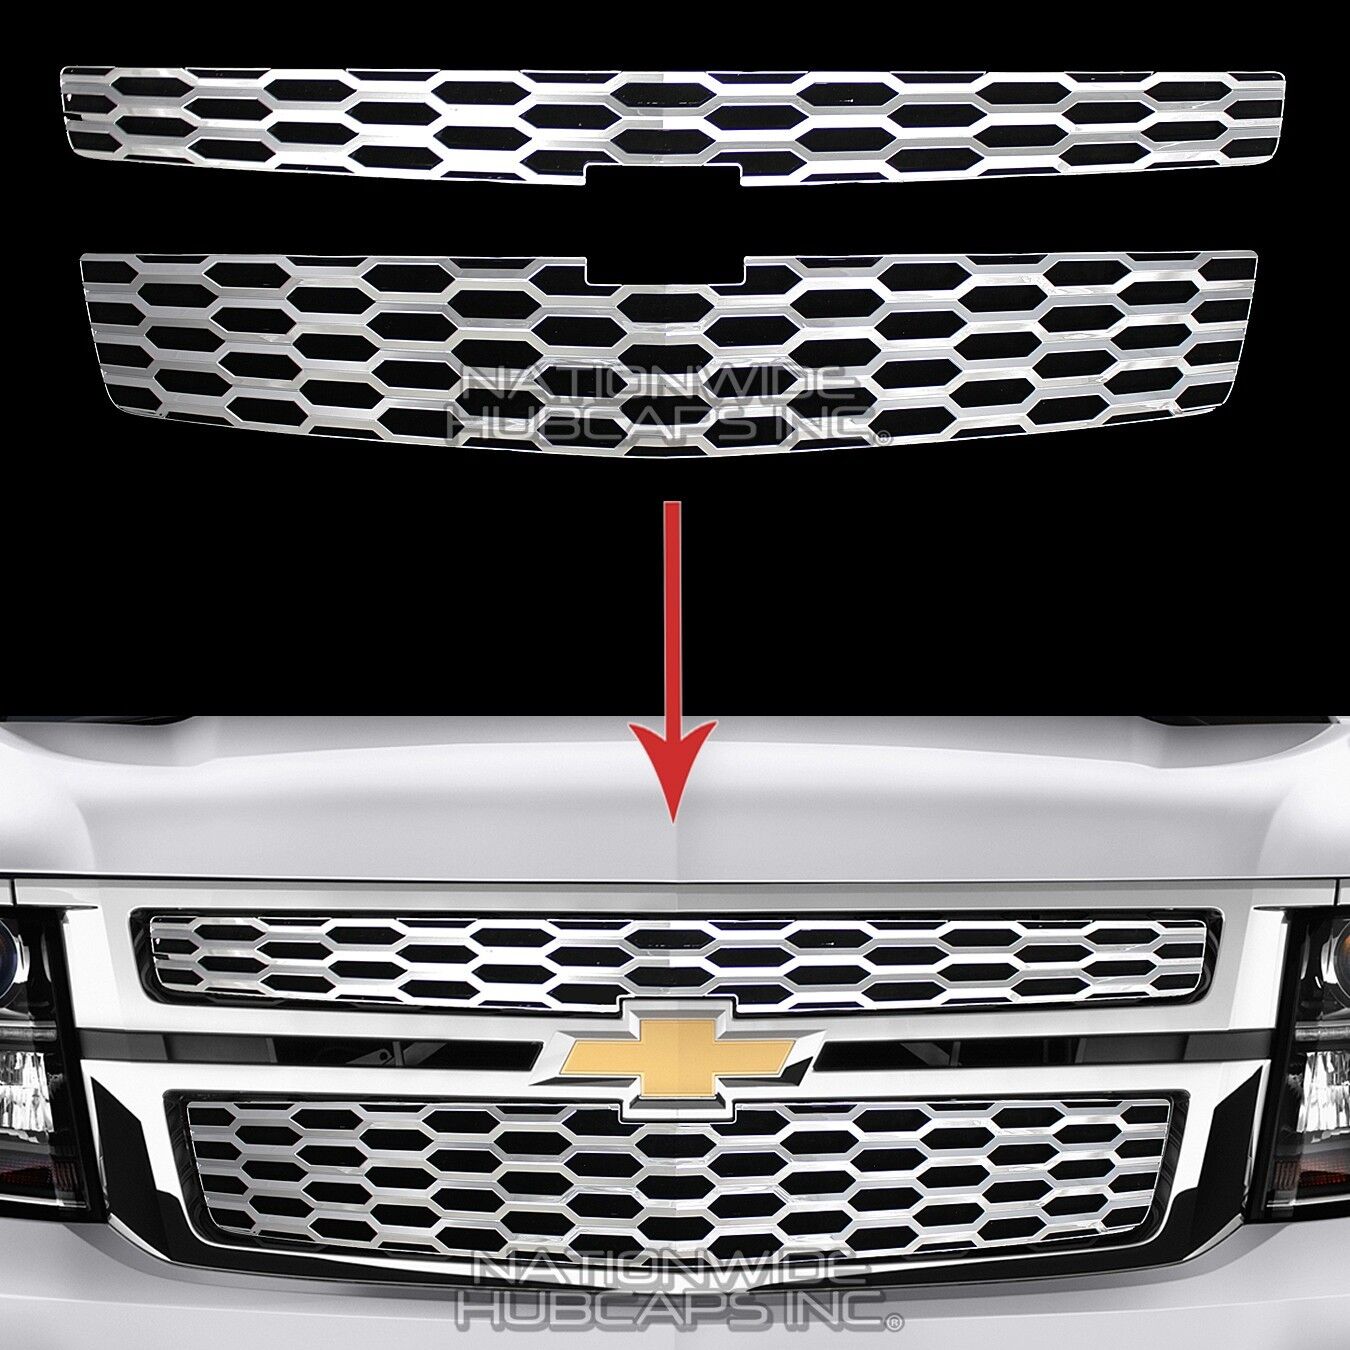 2015-18 Chevy Tahoe Suburban CHROME Snap On Grille Overlays Grill Covers Inserts